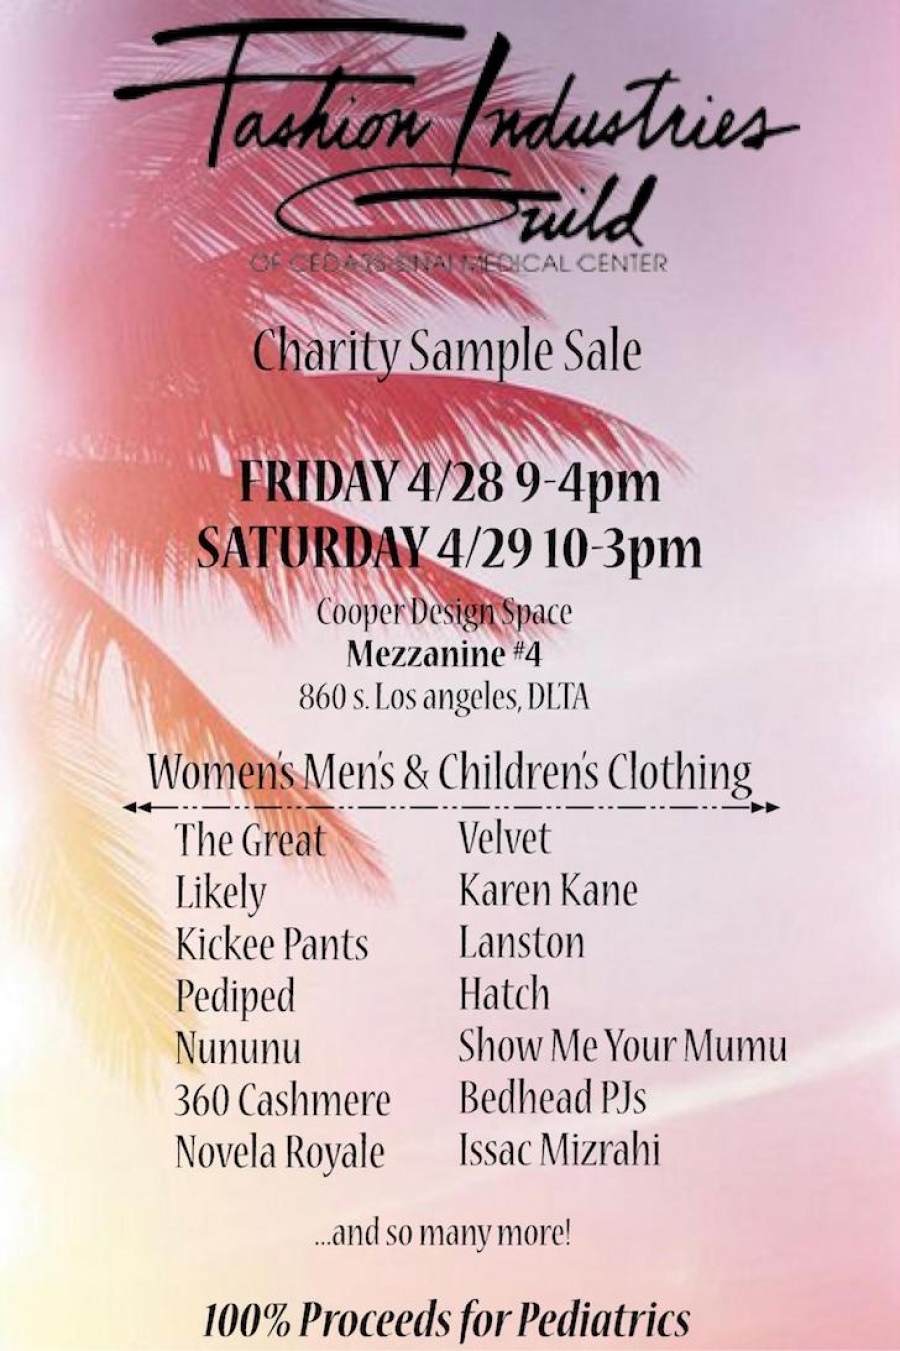 Fashion Industries Guild Charity Sample Sale